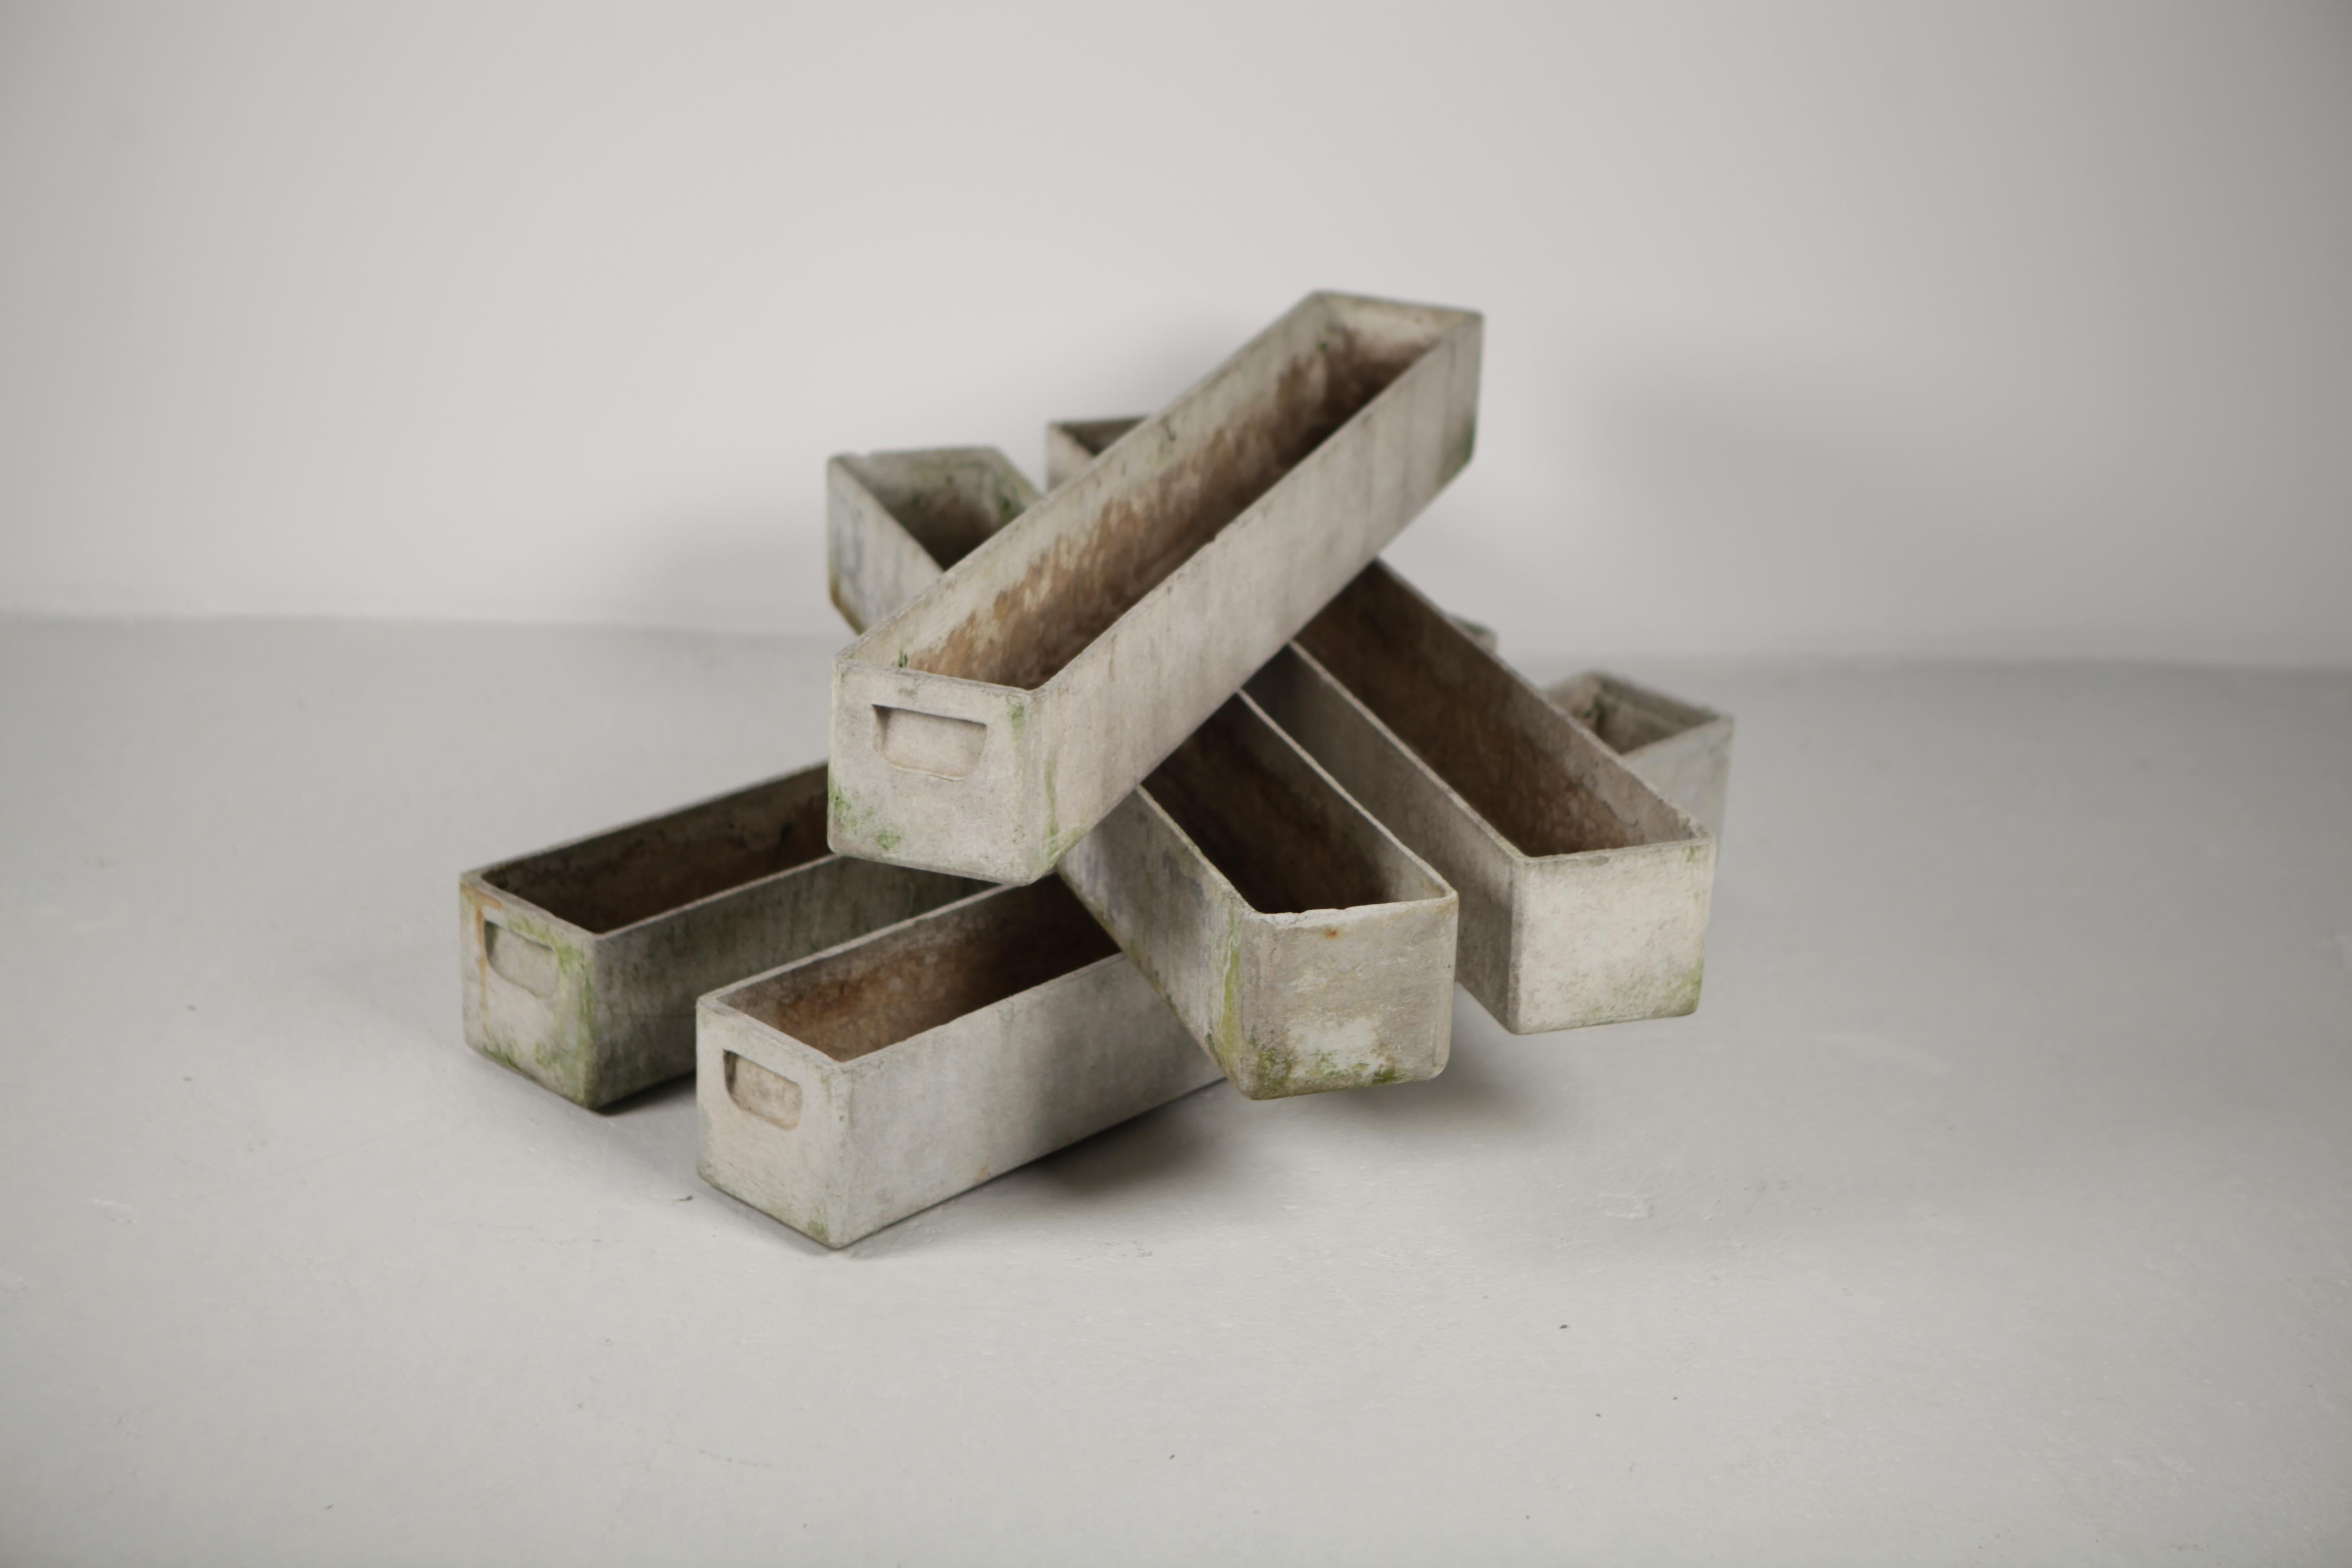 A set of 7 rectangular planters by Willy Guhl.
6 with 100cm length, 1 with 120cm.
Overall good condition, one of the 100cm planters with a non visible hole in the bottom, but no structural problem.